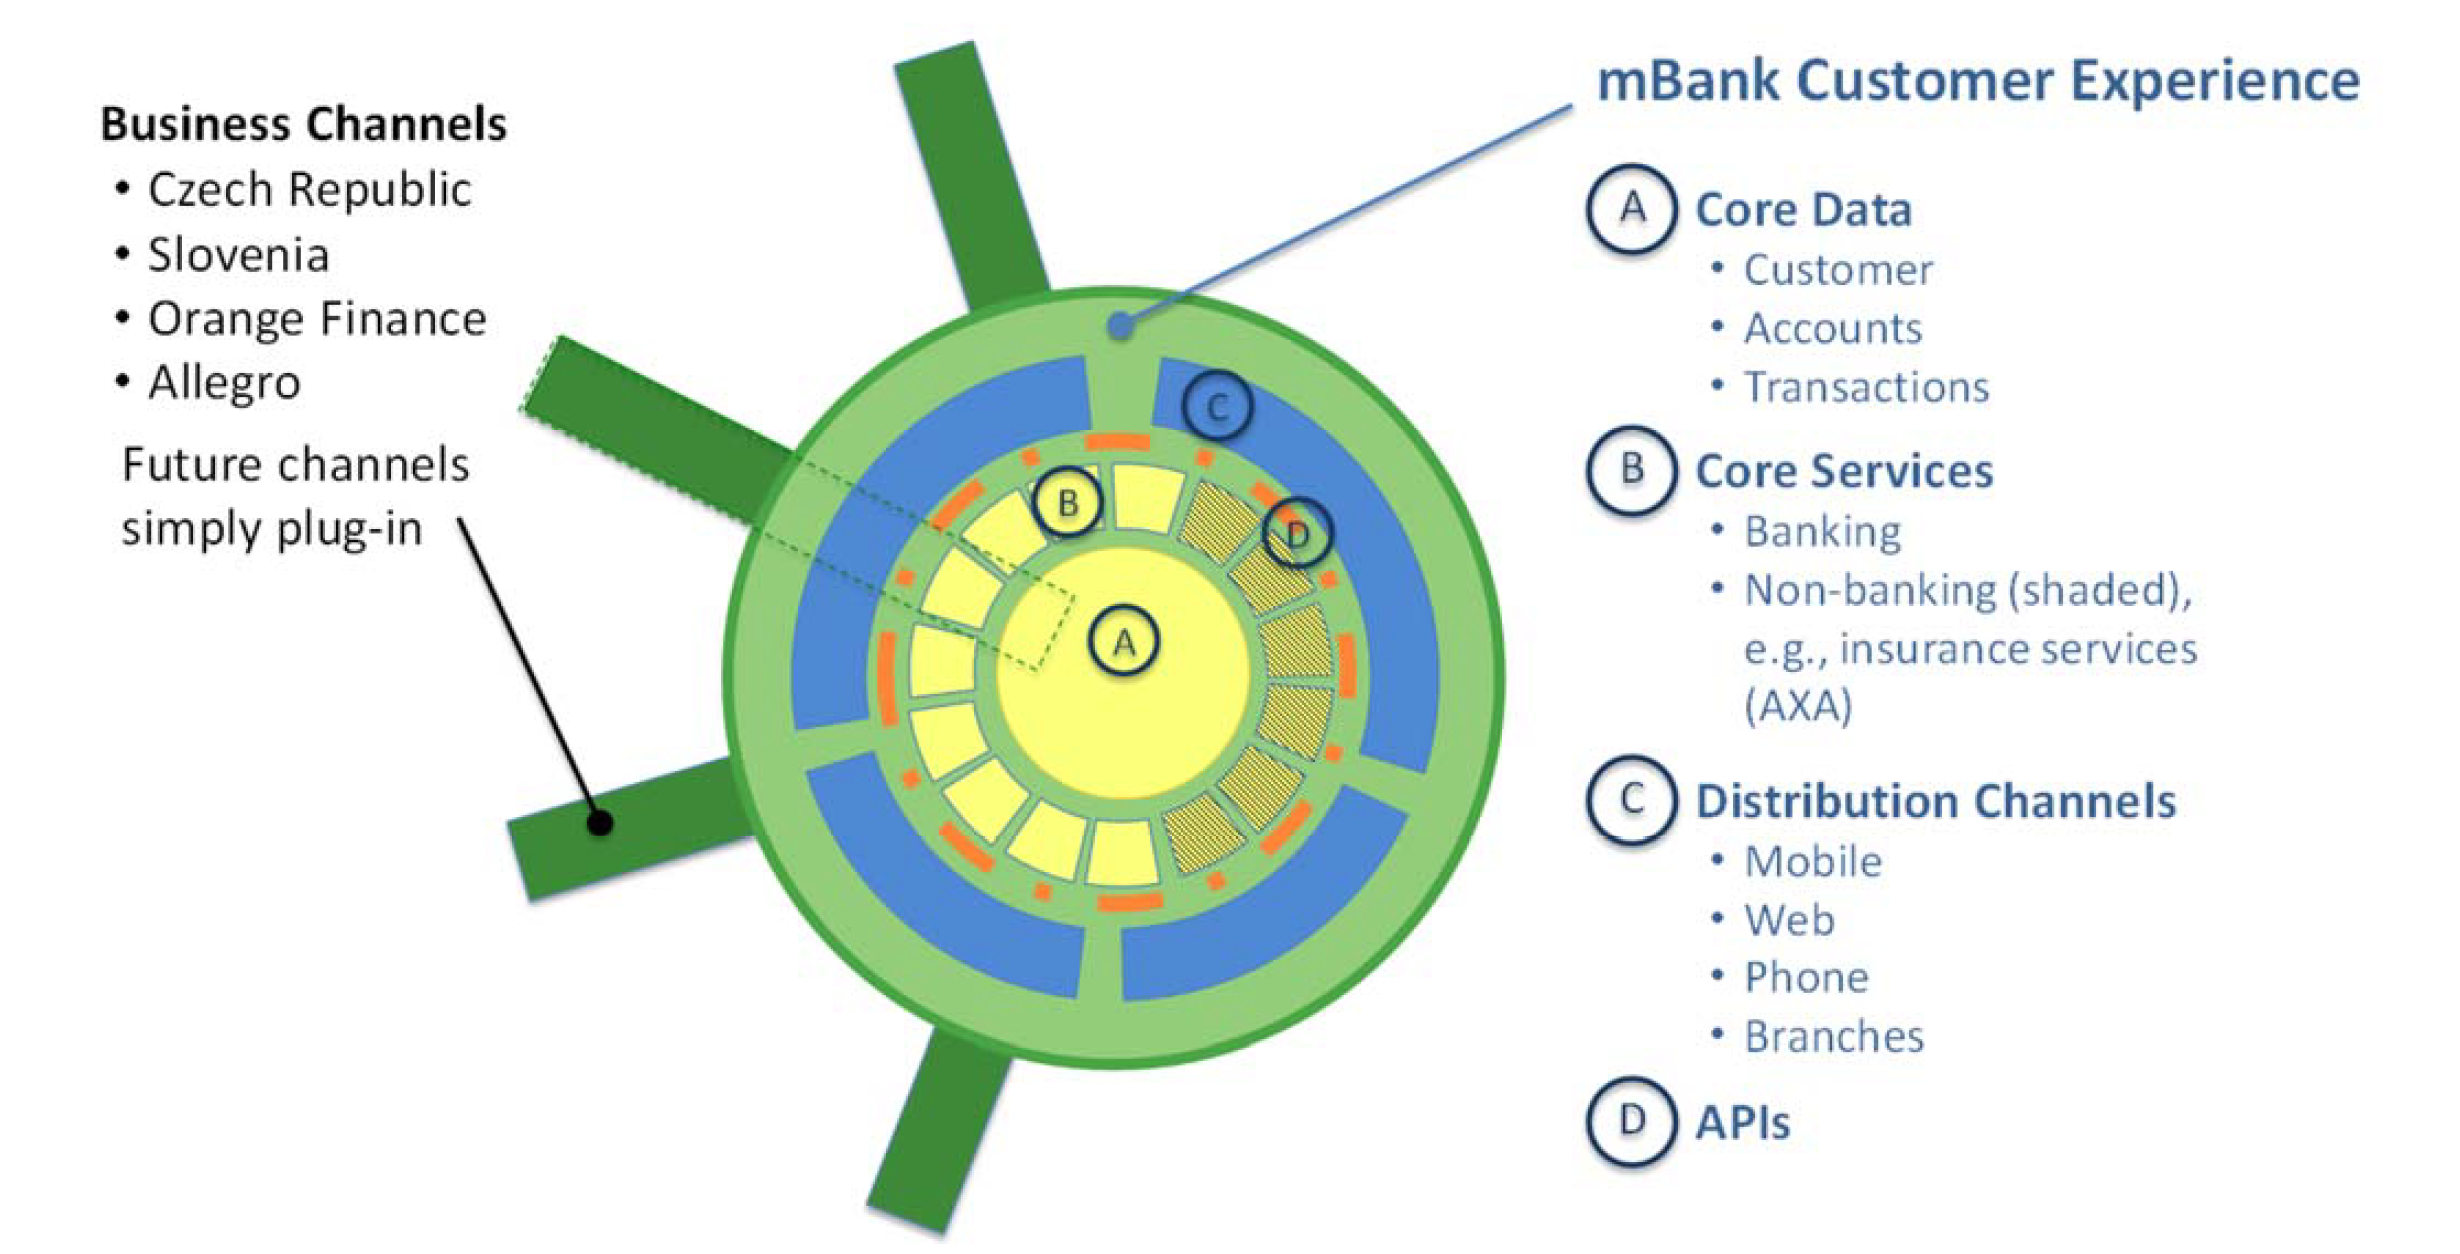 Figure 1: Reinventing the Core of Banking: mBank’s Customer Experience Relies on a Single Digitized Platform